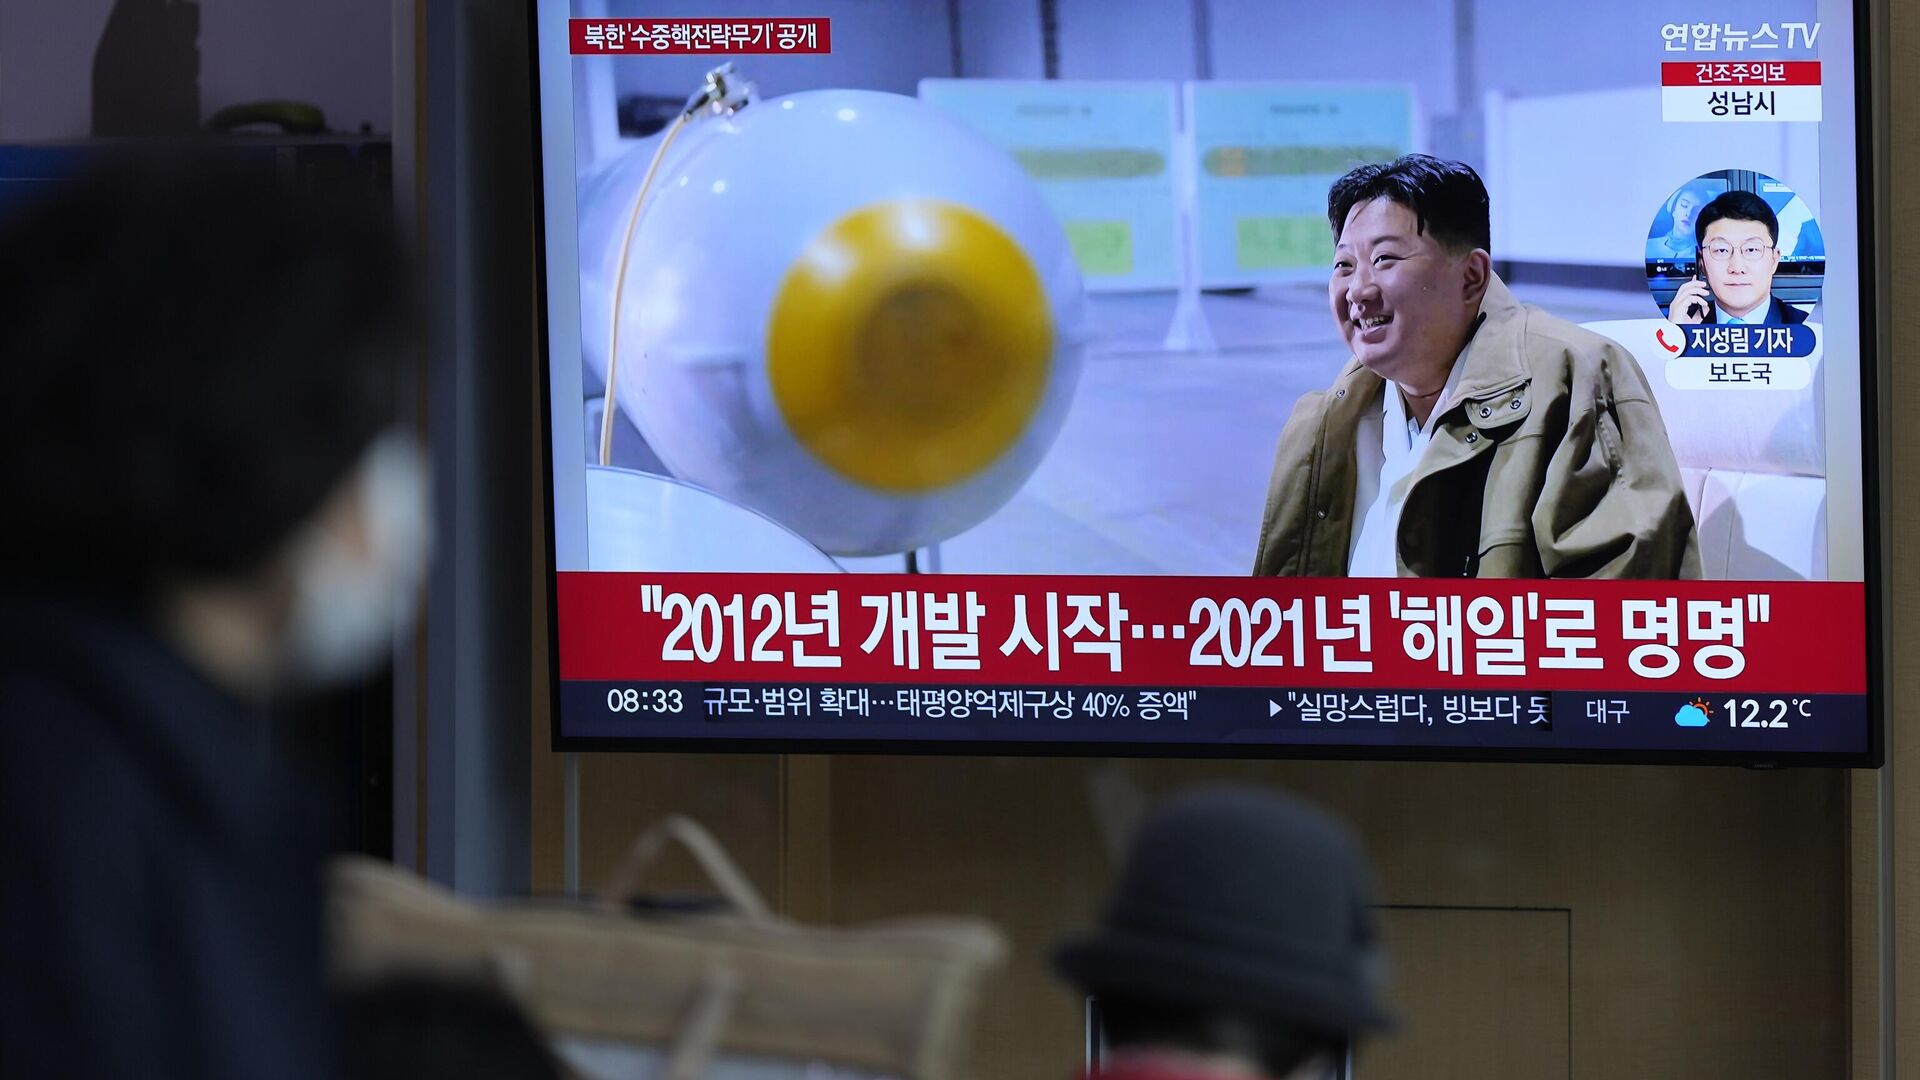 A TV screen shows an image of North Korean leader Kim Jong Un during a news program at the Seoul Railway Station in South Korea, Friday, March 24, 2023.  - Sputnik International, 1920, 24.03.2023